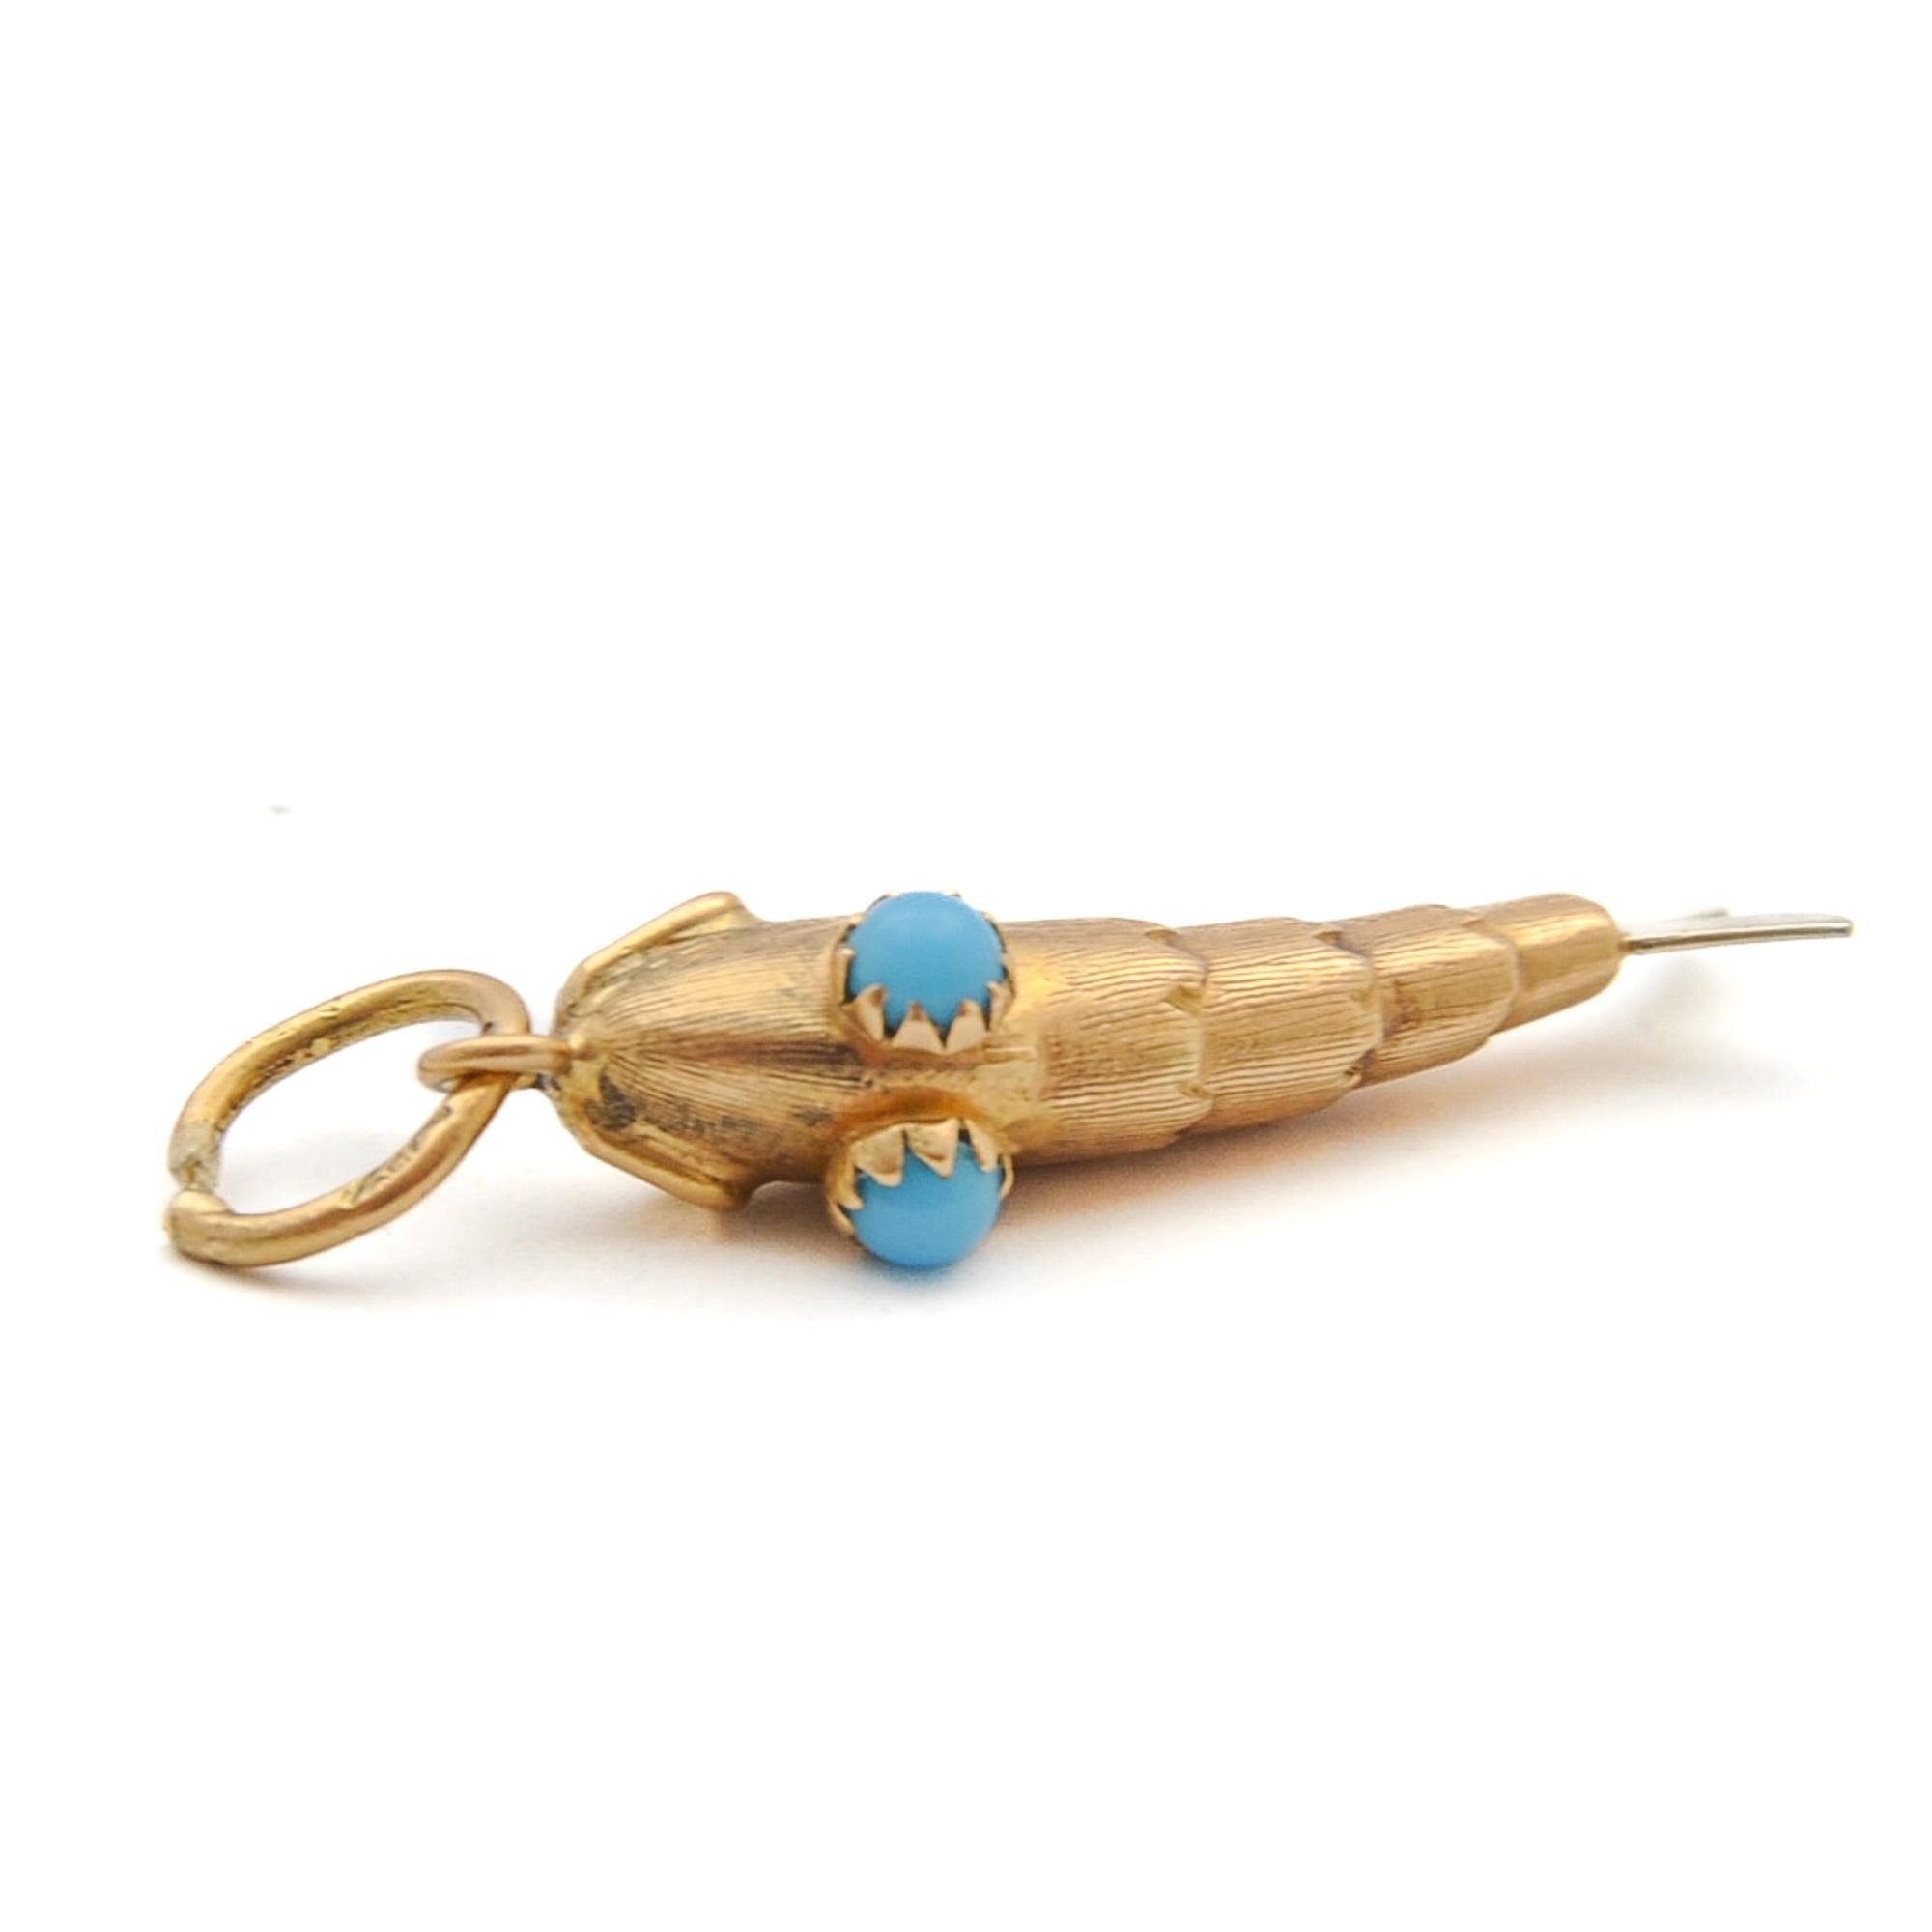 Vintage 18K Gold and Silver Turquoise Fish Charm Pendant For Sale 2